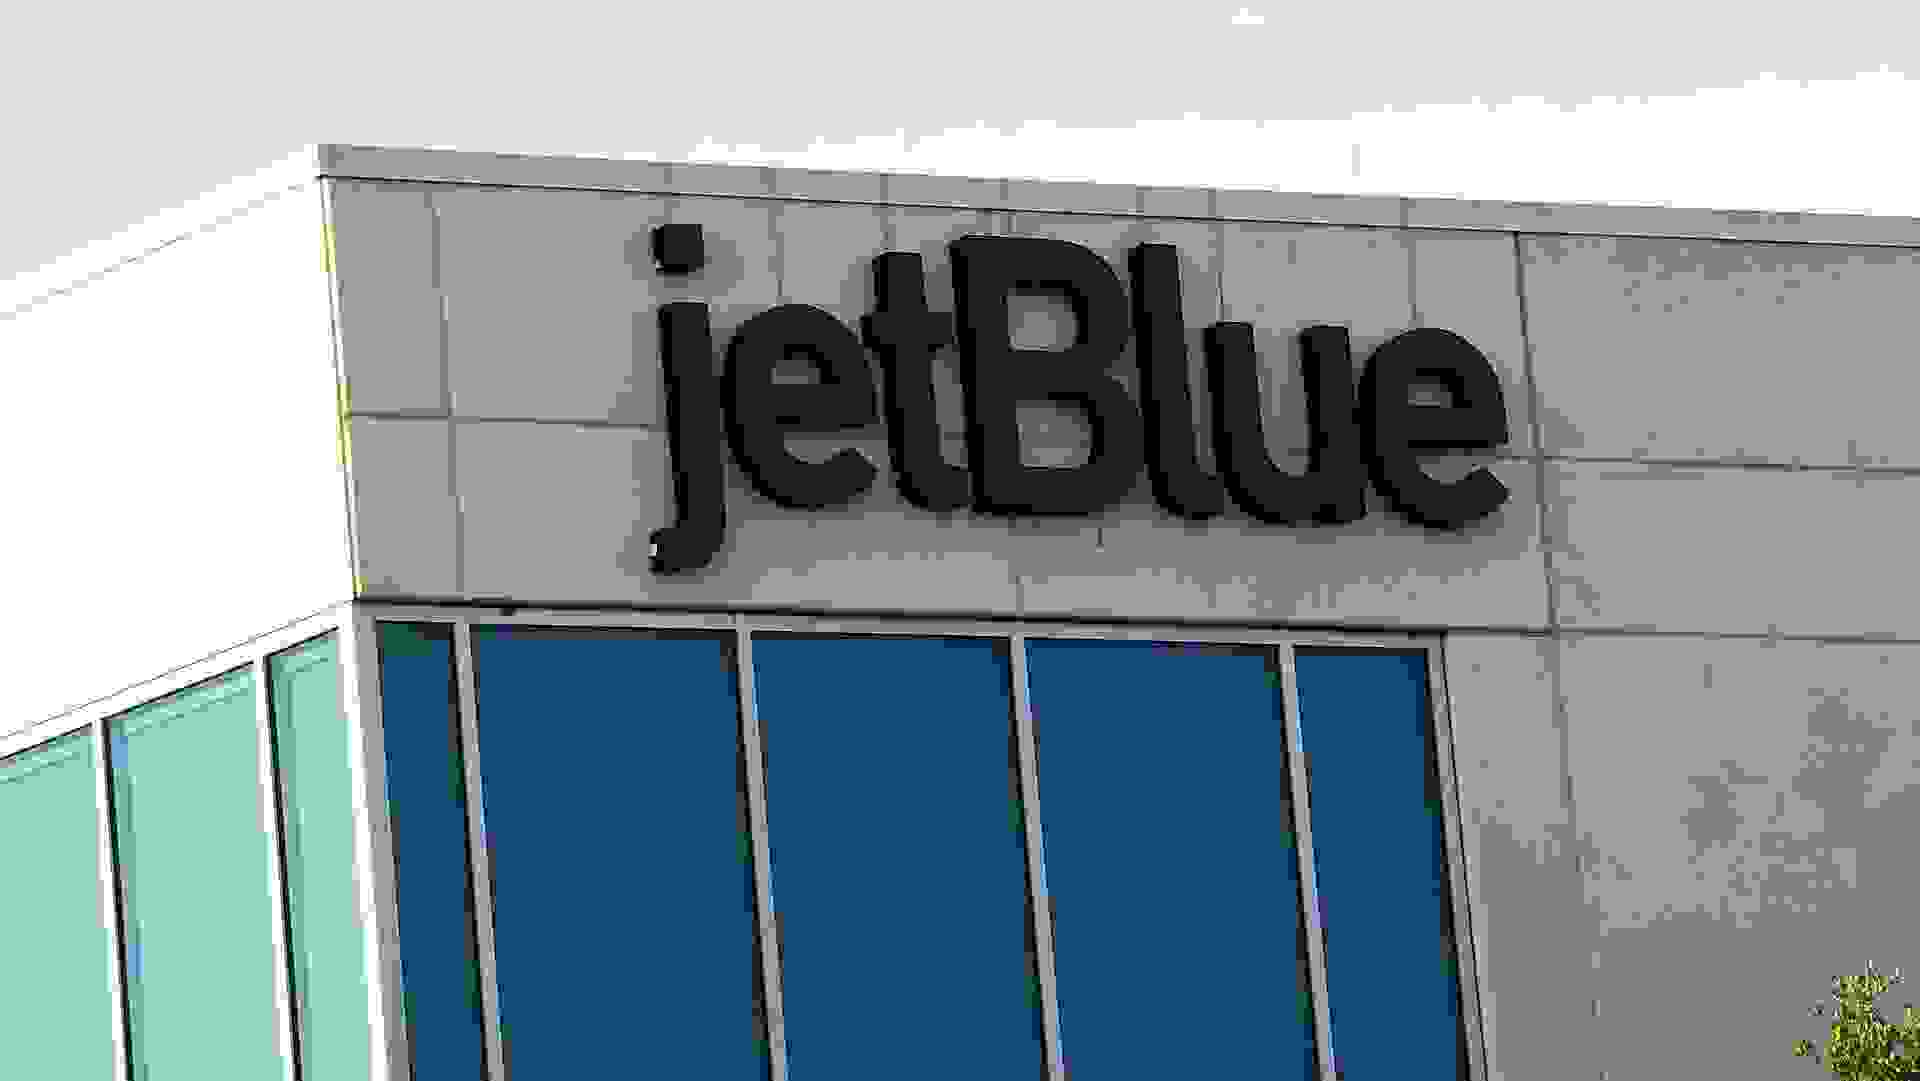 JetBlue Launches Hostile Takeover for Spirit Airlines in Orlando, US - 16 May 2022